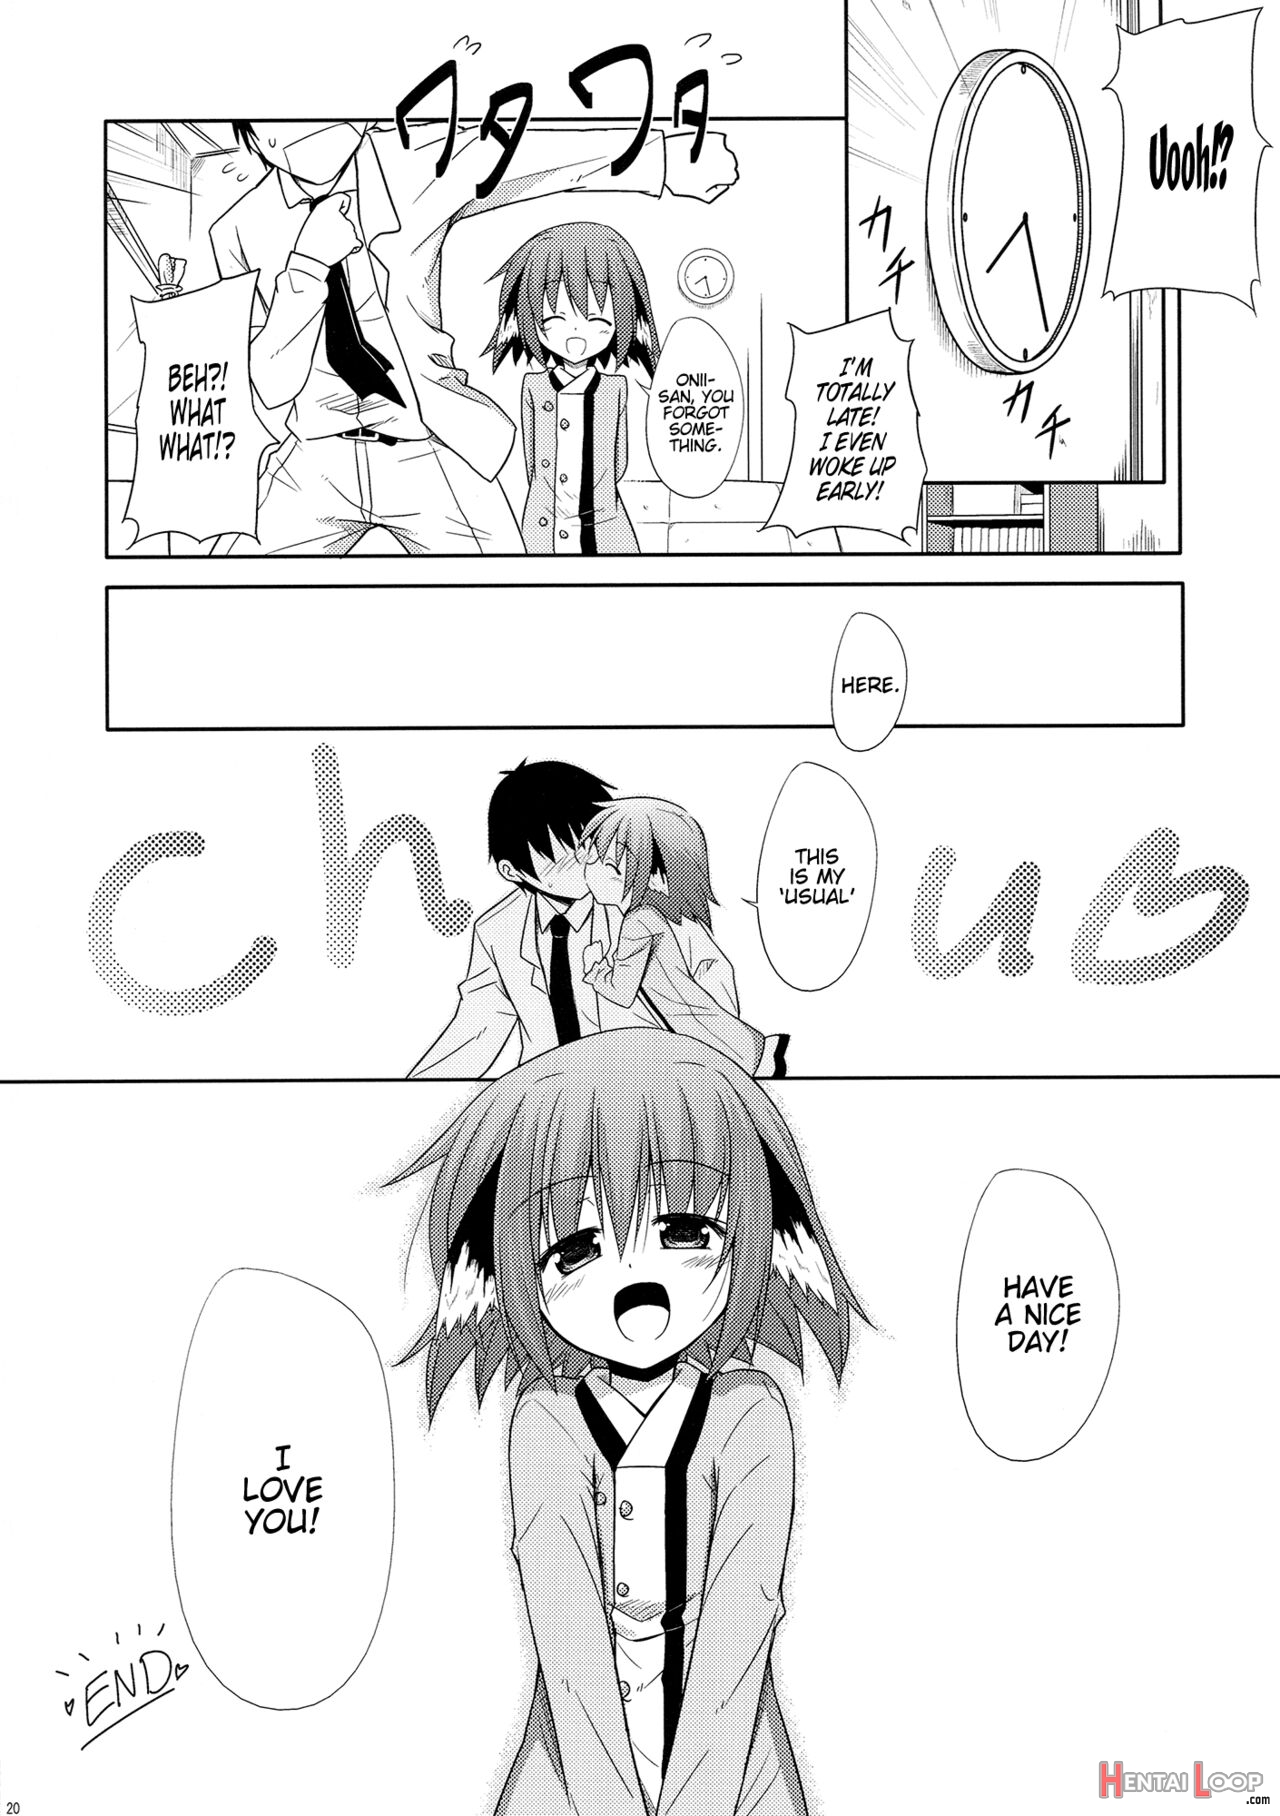 Kyouko's Daily Life page 19